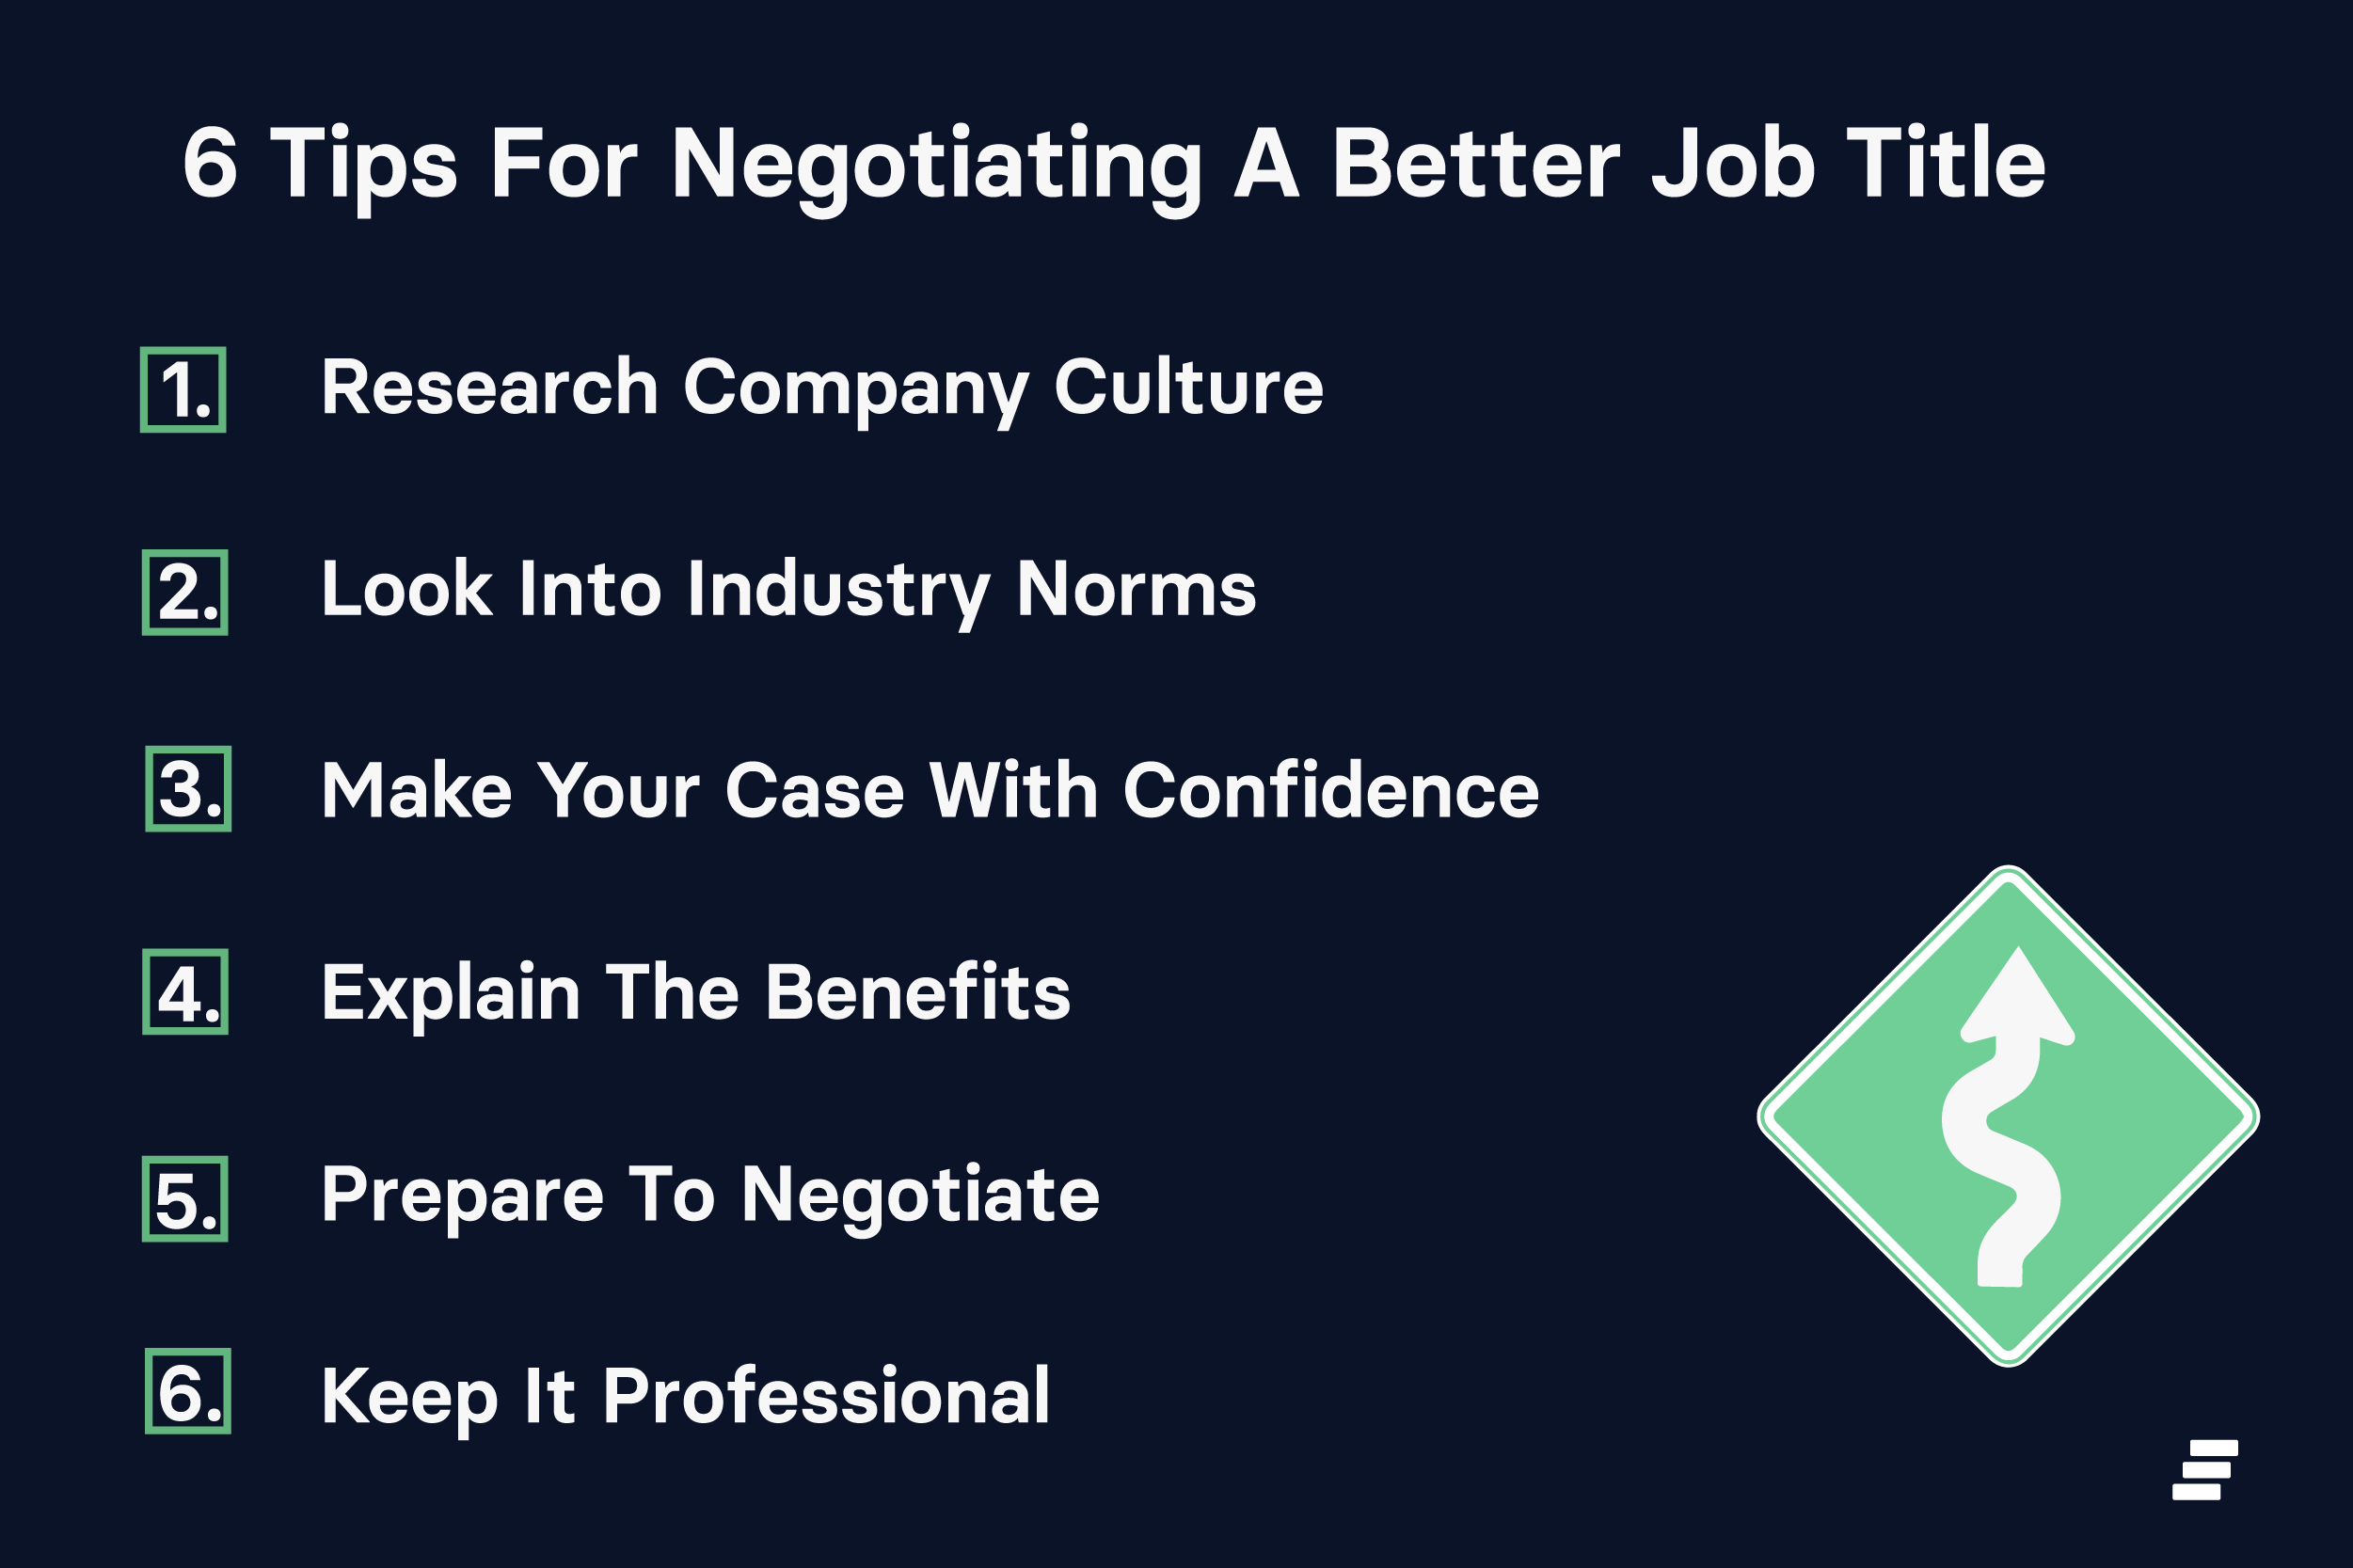 Graphic outlining 6 tips for negotiating a better job title